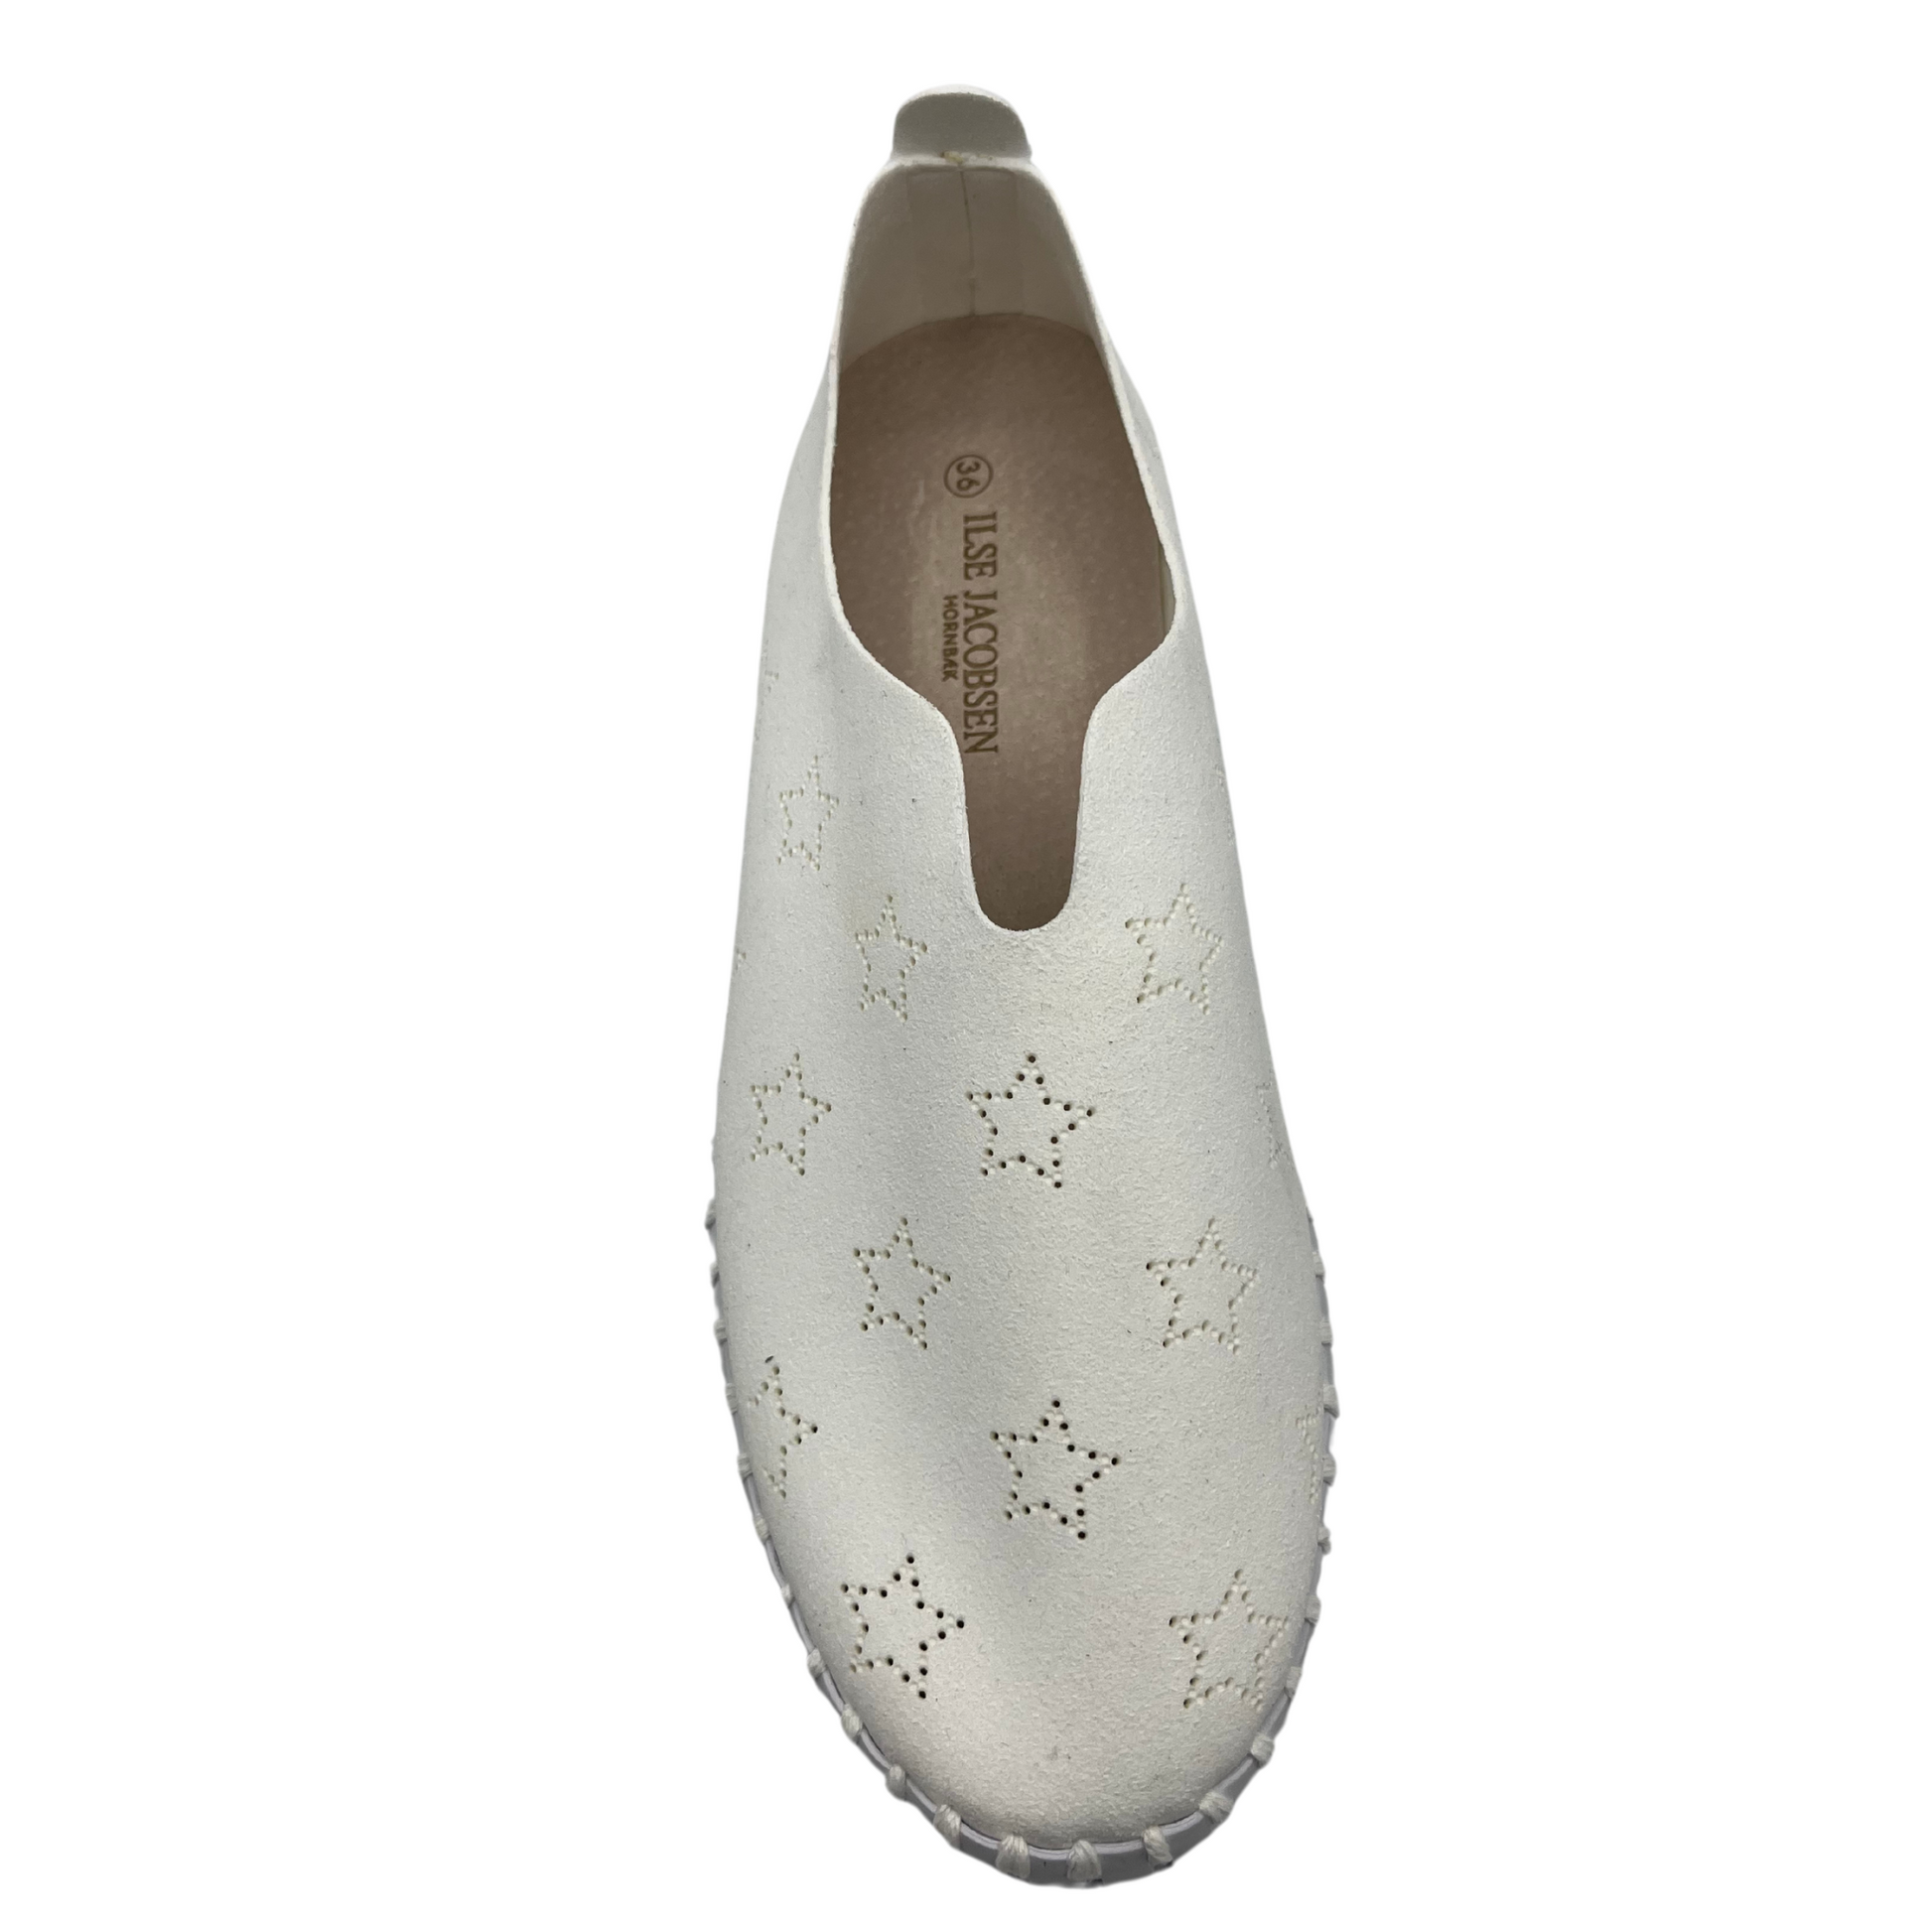 Top view of white slip on sneakers with small star cutouts on upper. White rubber platform sole.